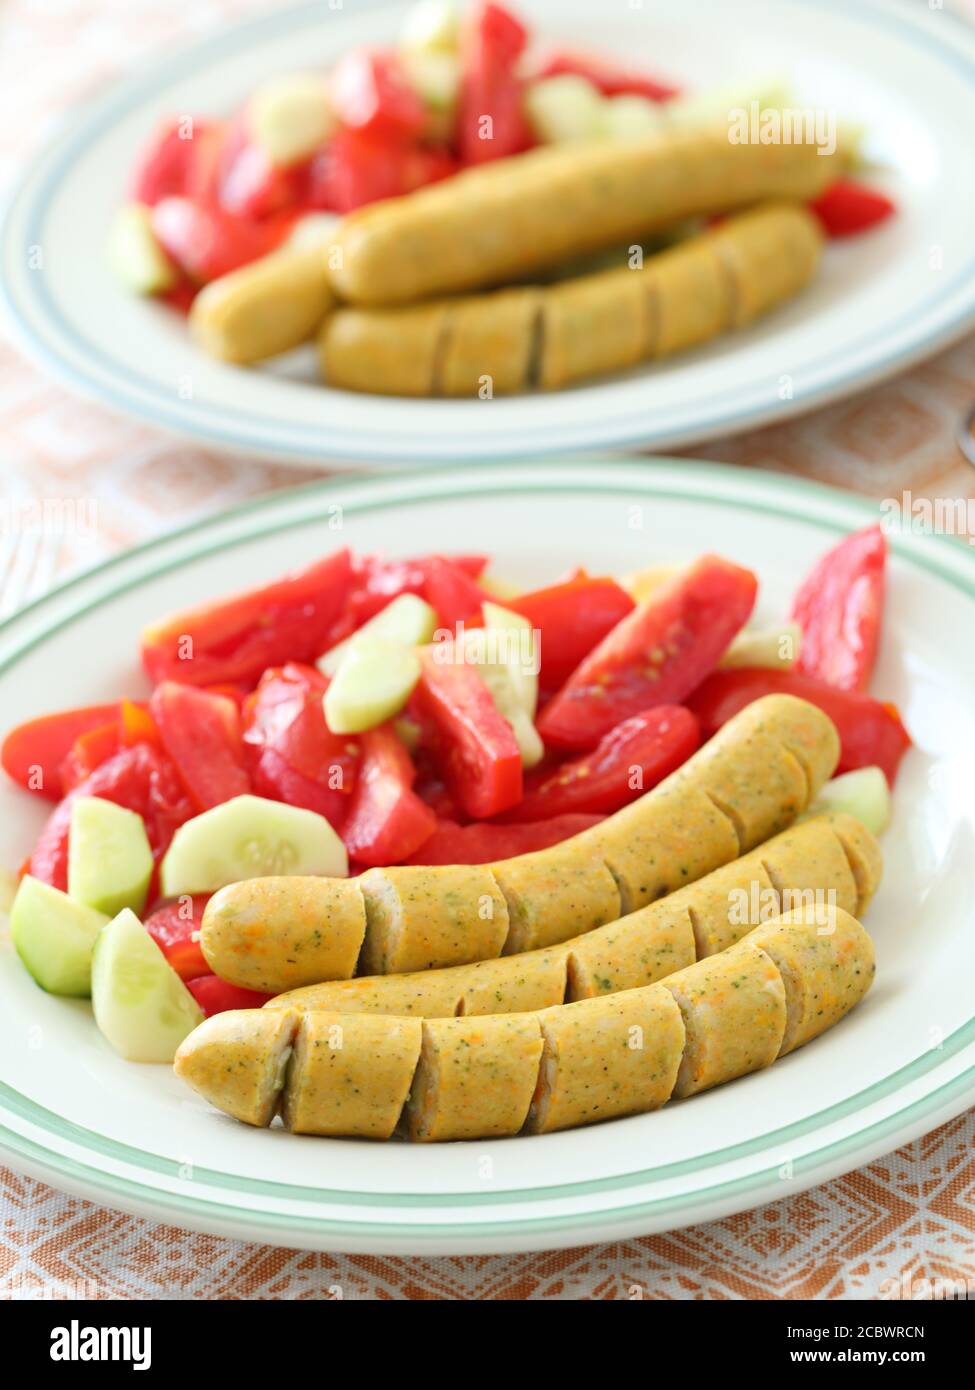 Two portion of sausages with tomato and cucumber salad Stock Photo